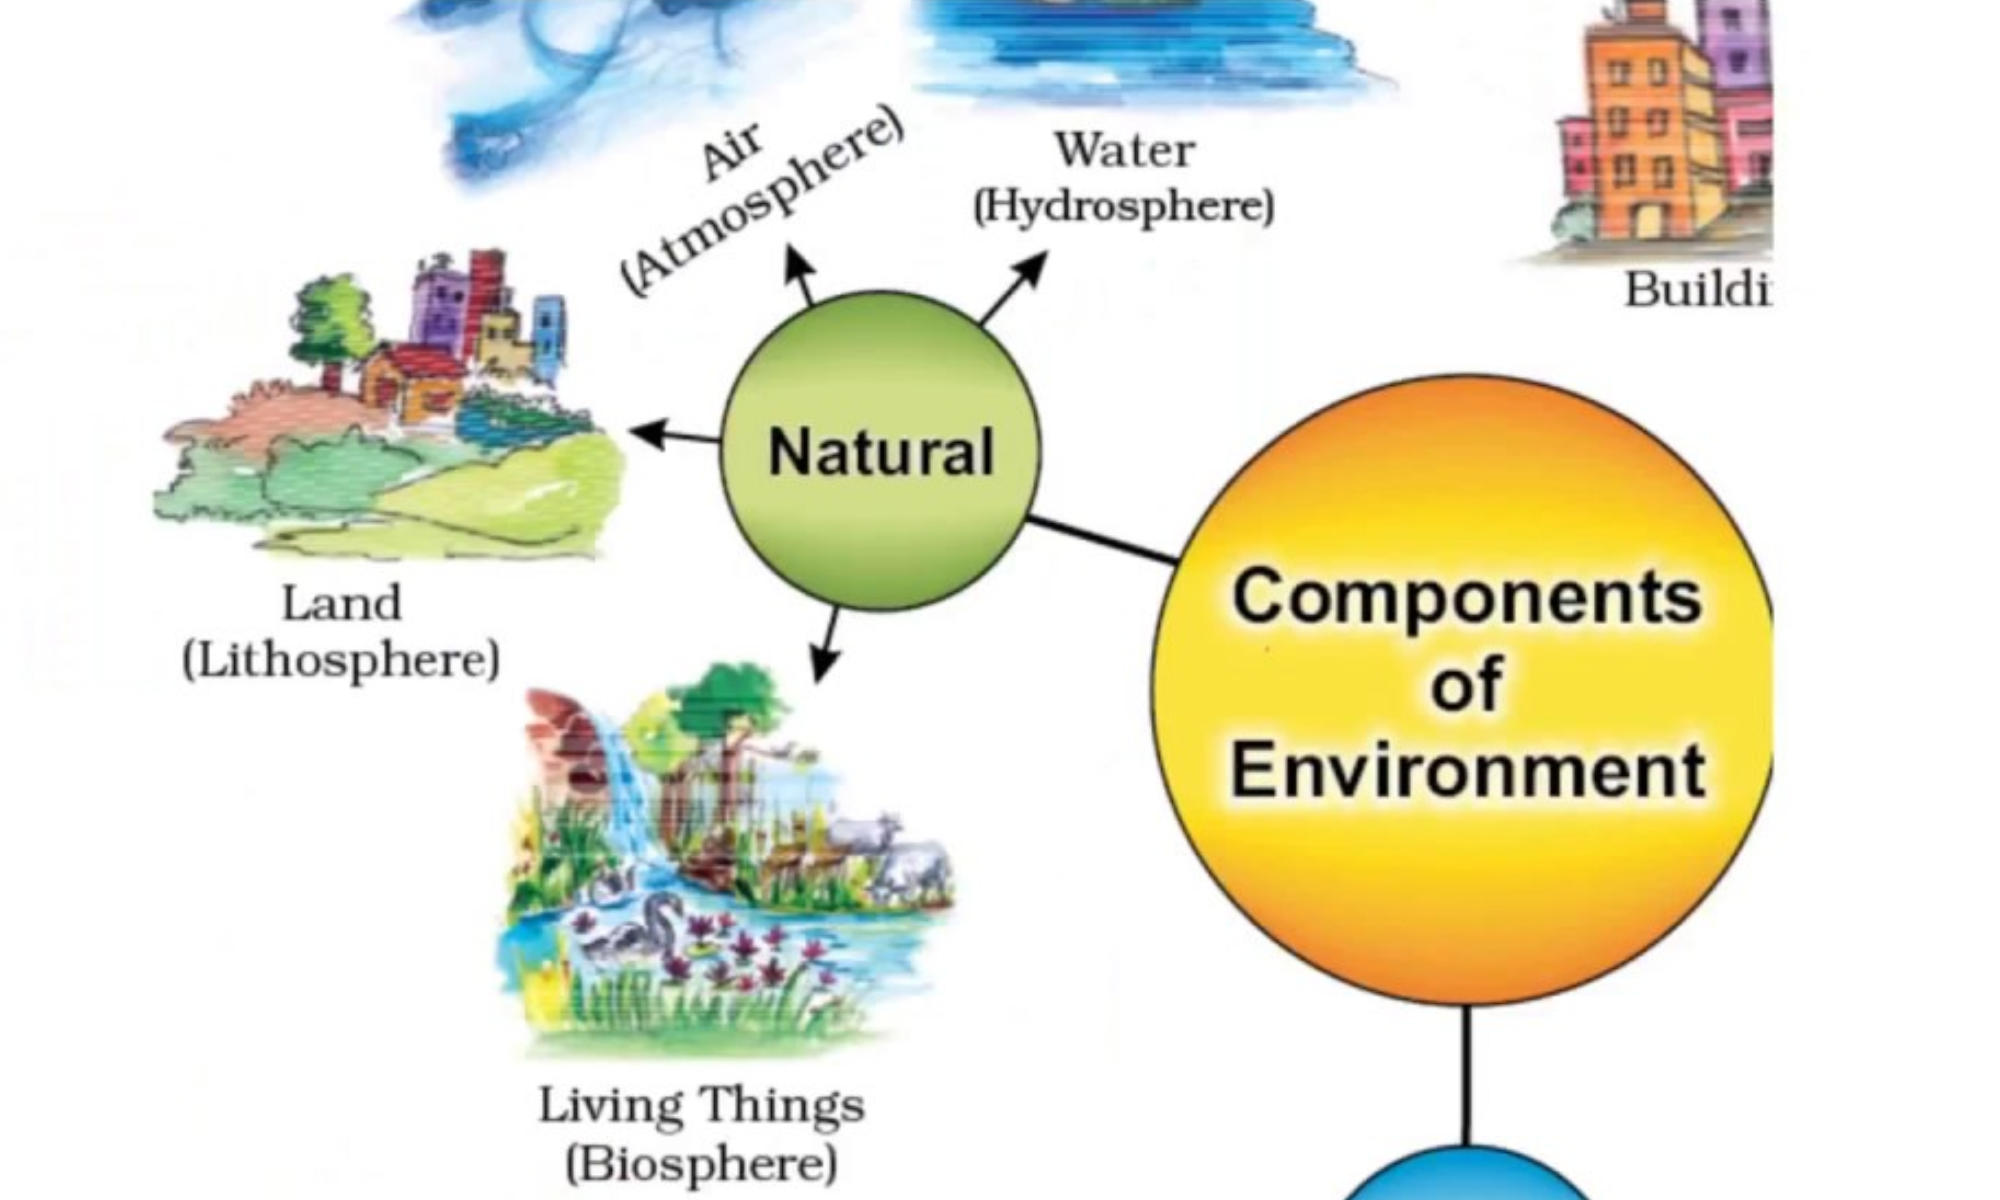 Components of Environment